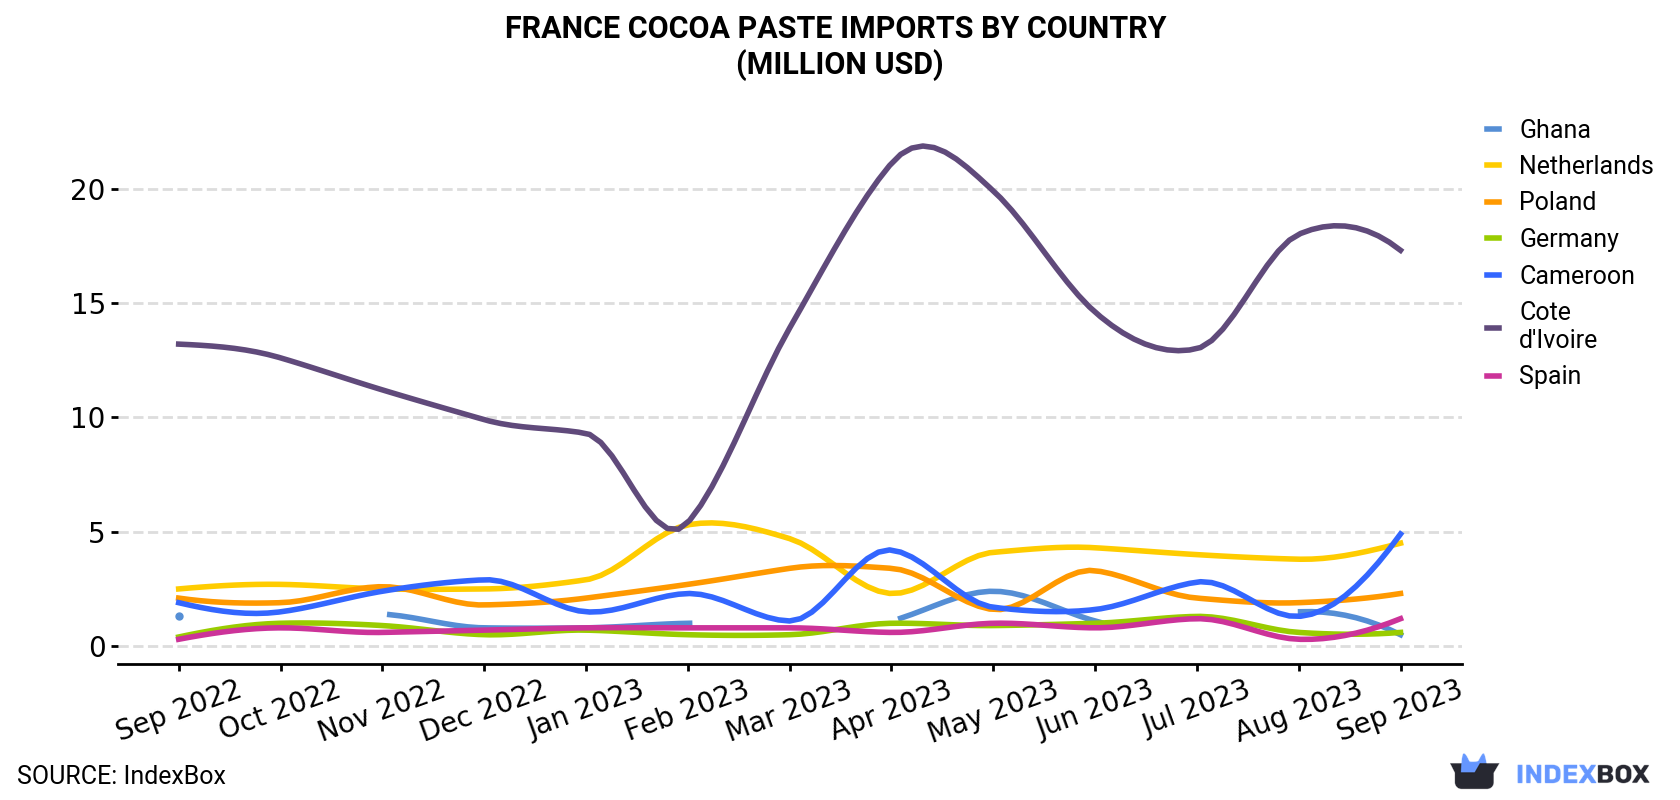 France Cocoa Paste Imports By Country (Million USD)